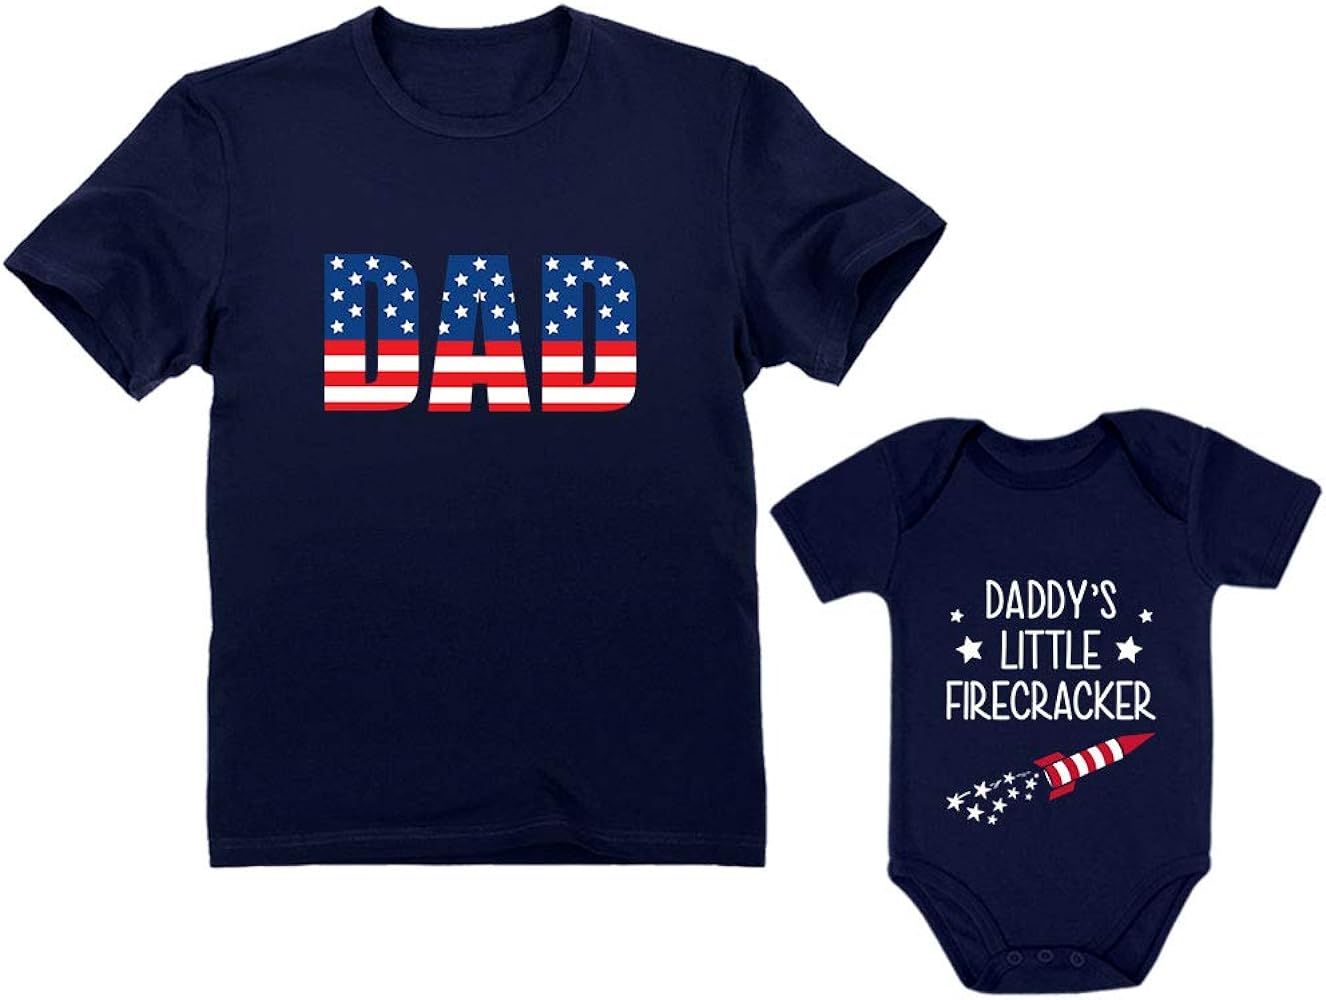 Tstars USA Patriotic Father Son Matching Shirts 4th of July Dad and Baby Outfits | Amazon (US)